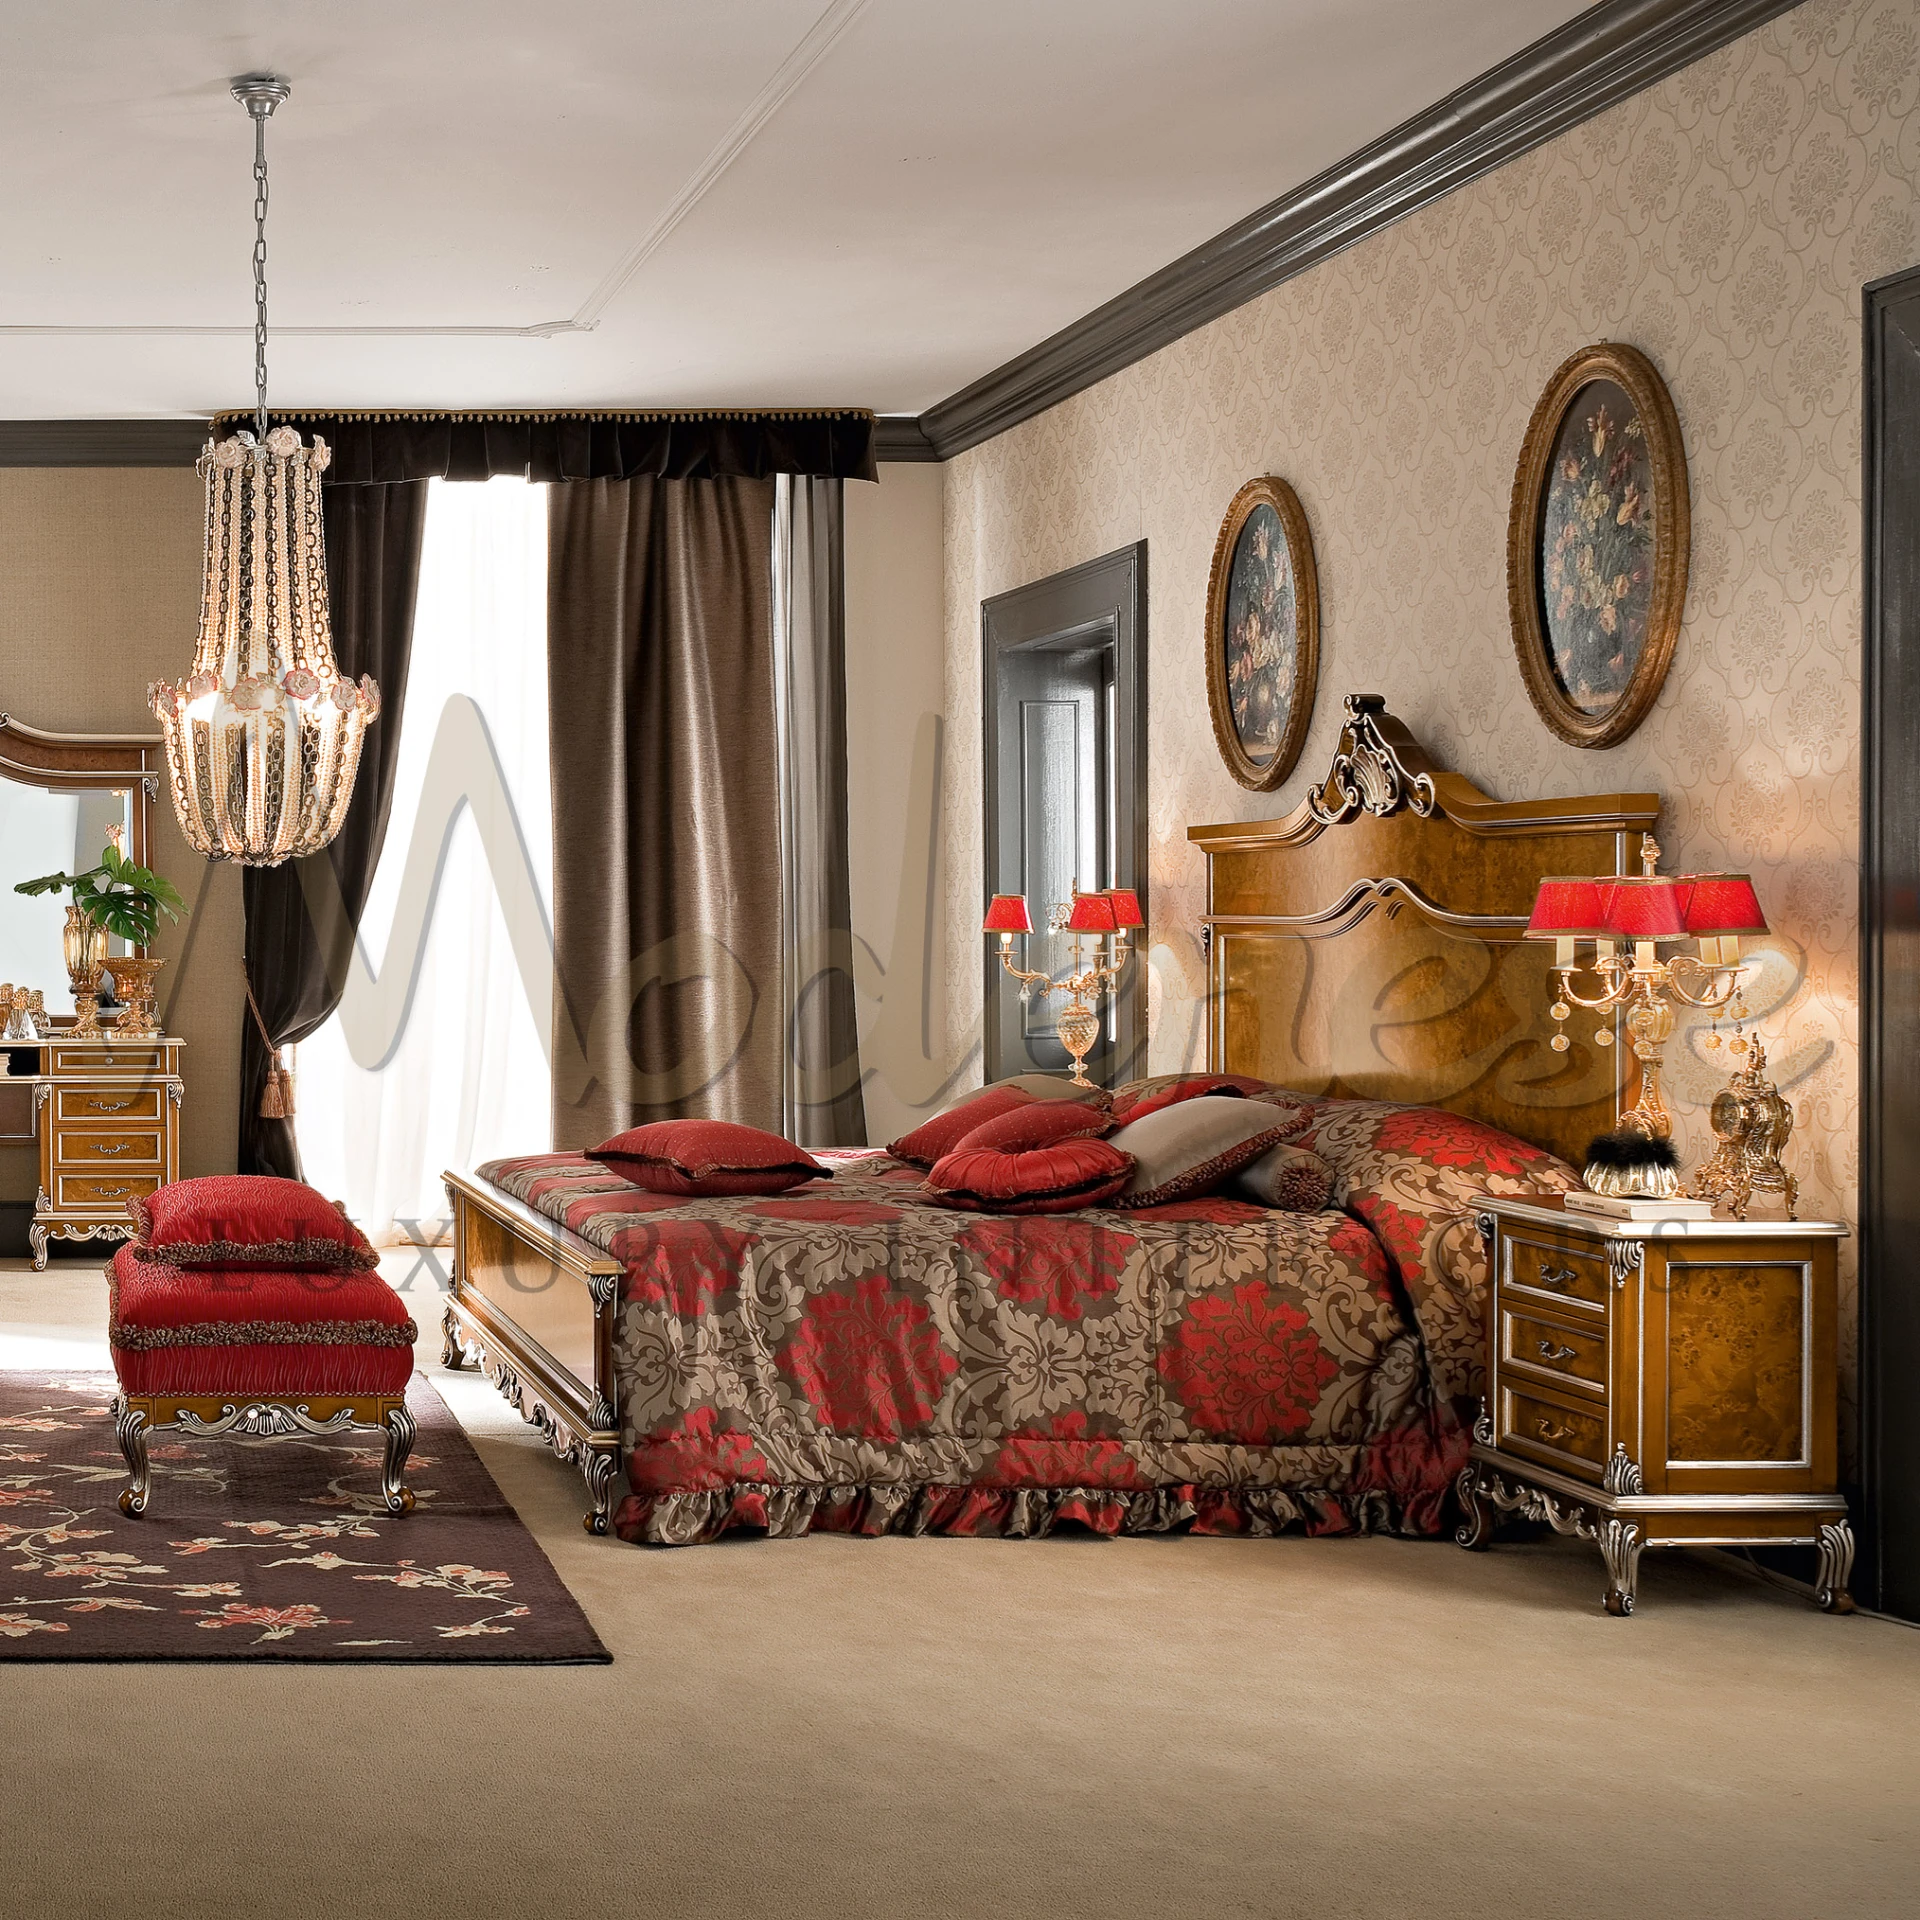 A classic bedroom with a wooden bed, red floral bedding, elegant lamps, and a matching bench under a decorative chandelier created by Modenese Furniture.